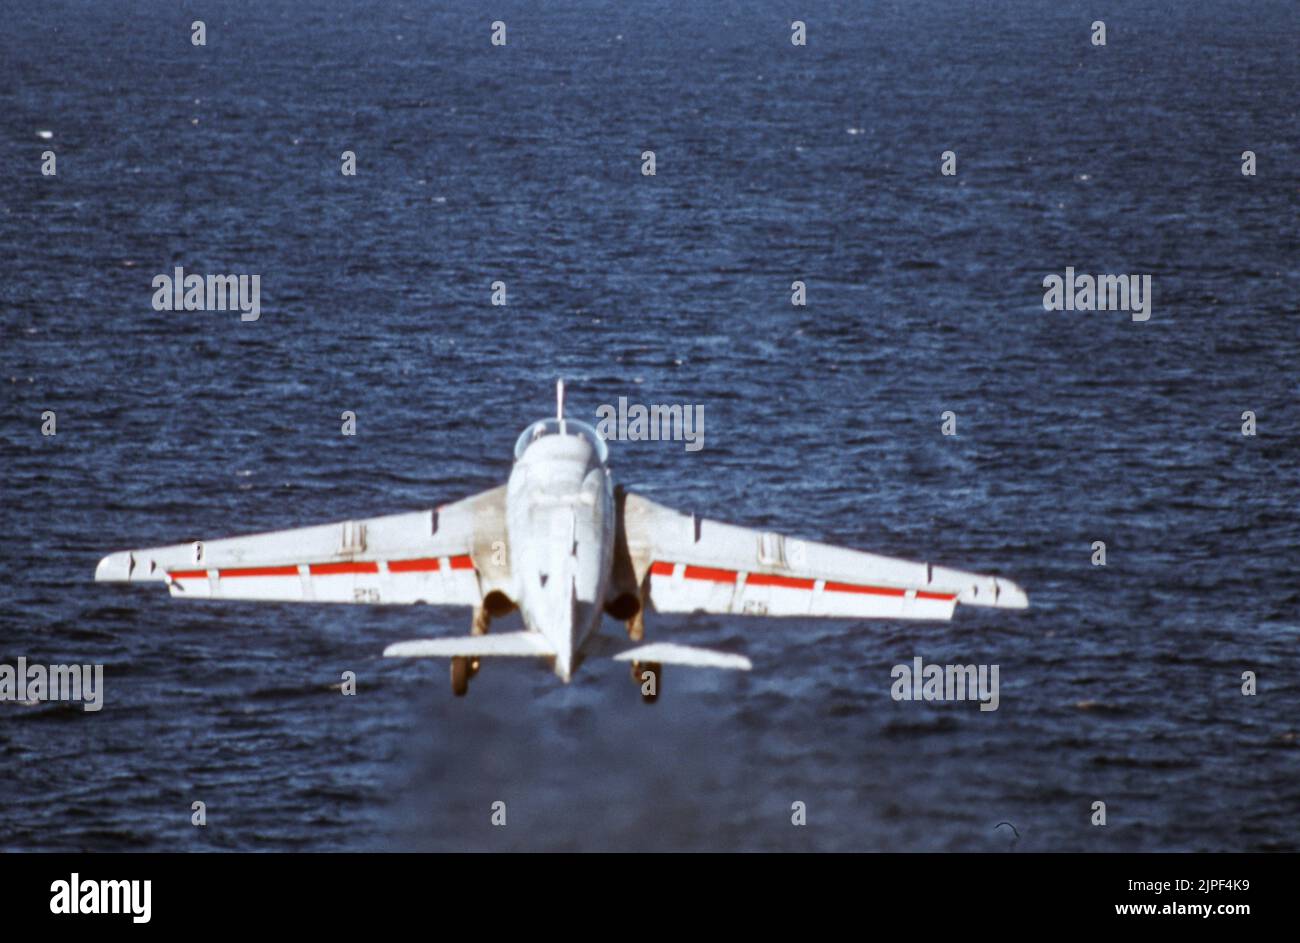 Grumman A-6 Intruder takes off from a United States Navy aircraft carrier underway at sea Stock Photo